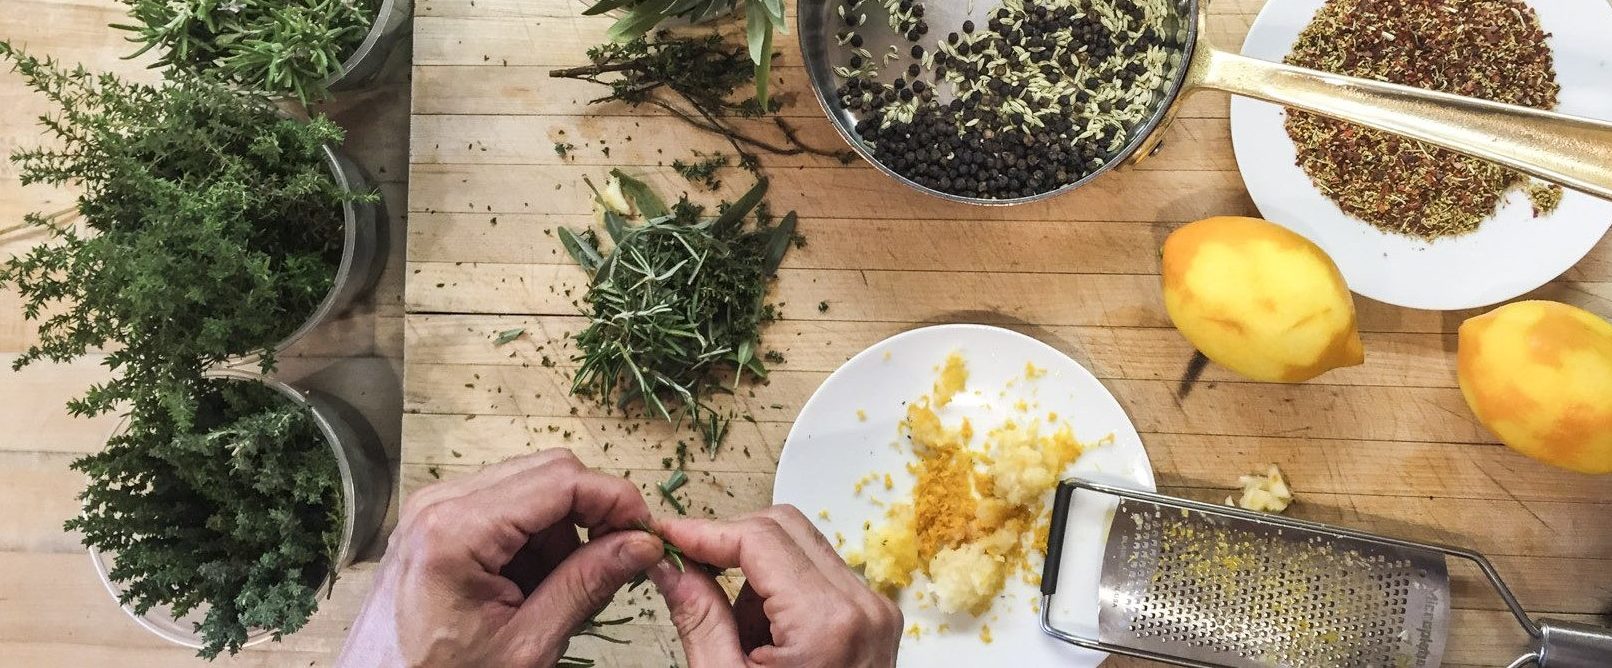 hands pinching at herbs next to a plate with lemon zest and ingredients in a pot